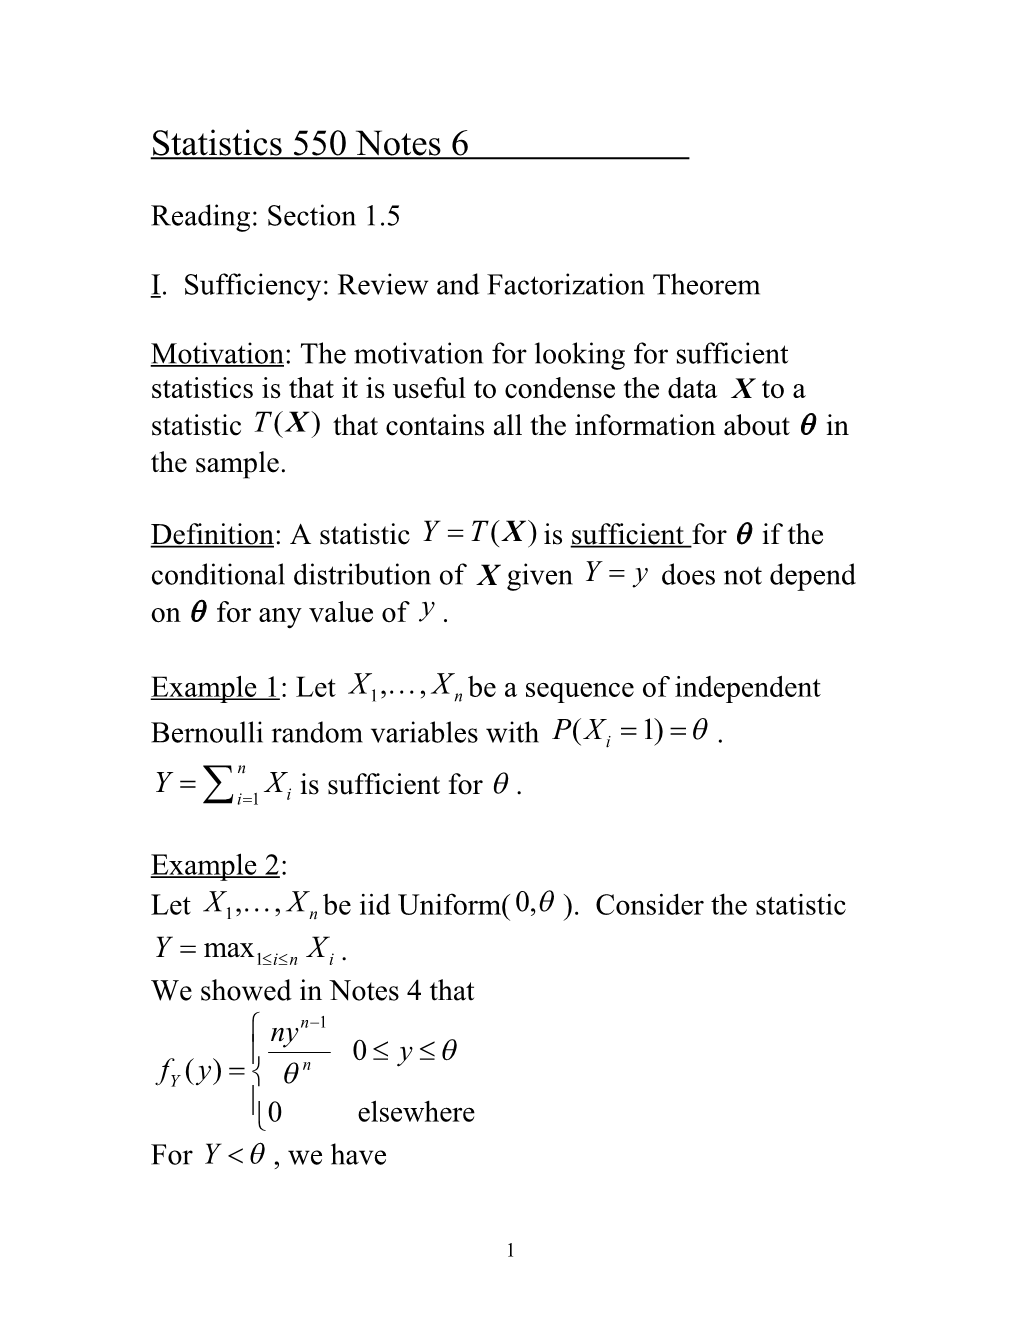 I. Sufficiency: Review and Factorization Theorem